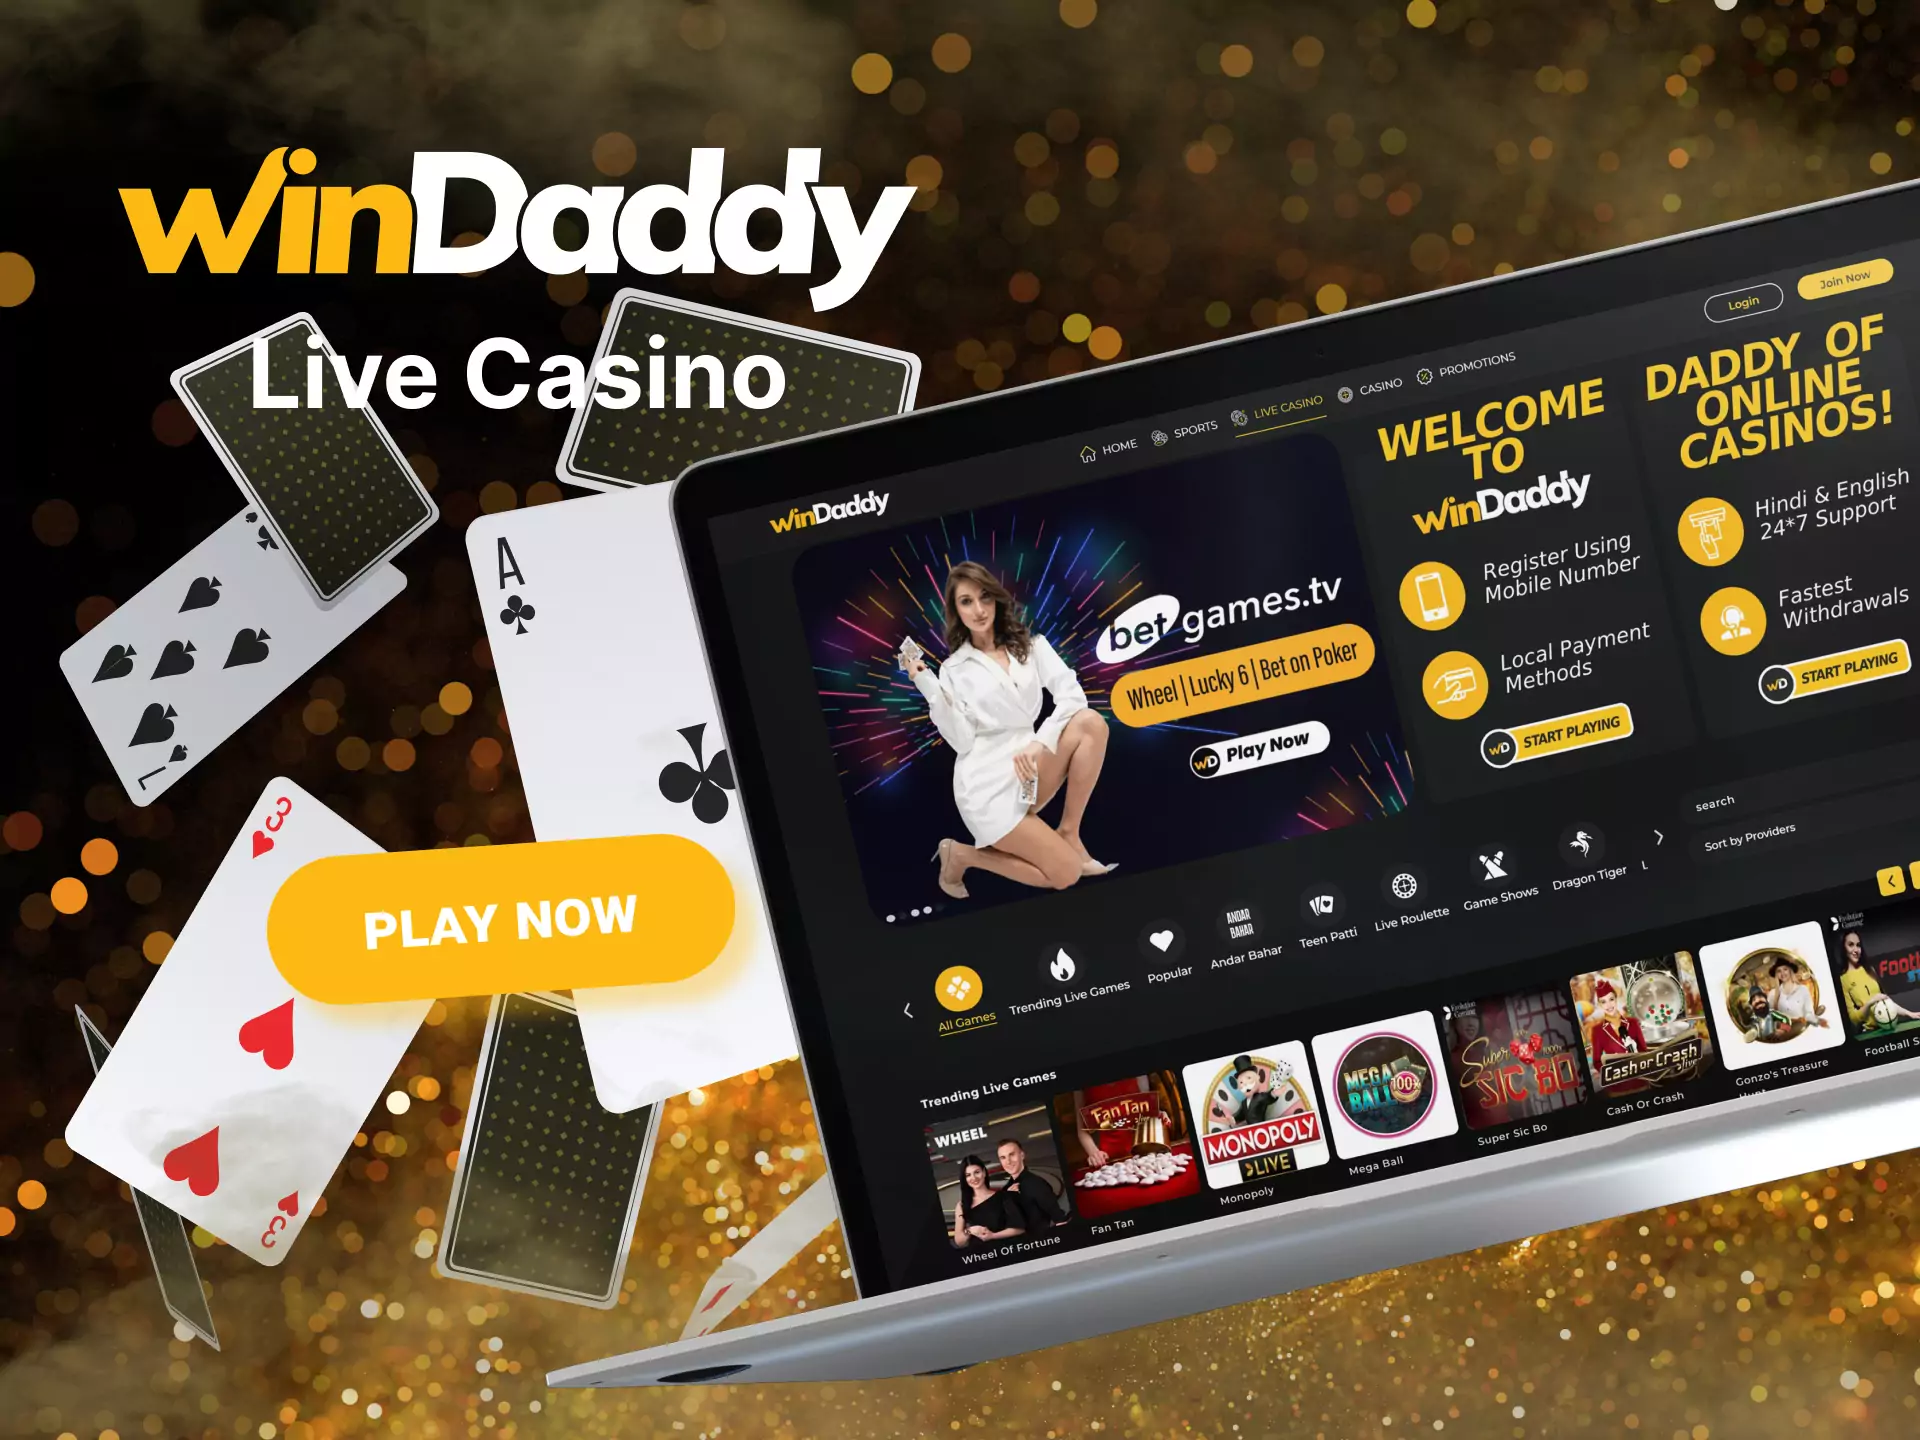 Play live casino with real charming dealers on Windaddy.